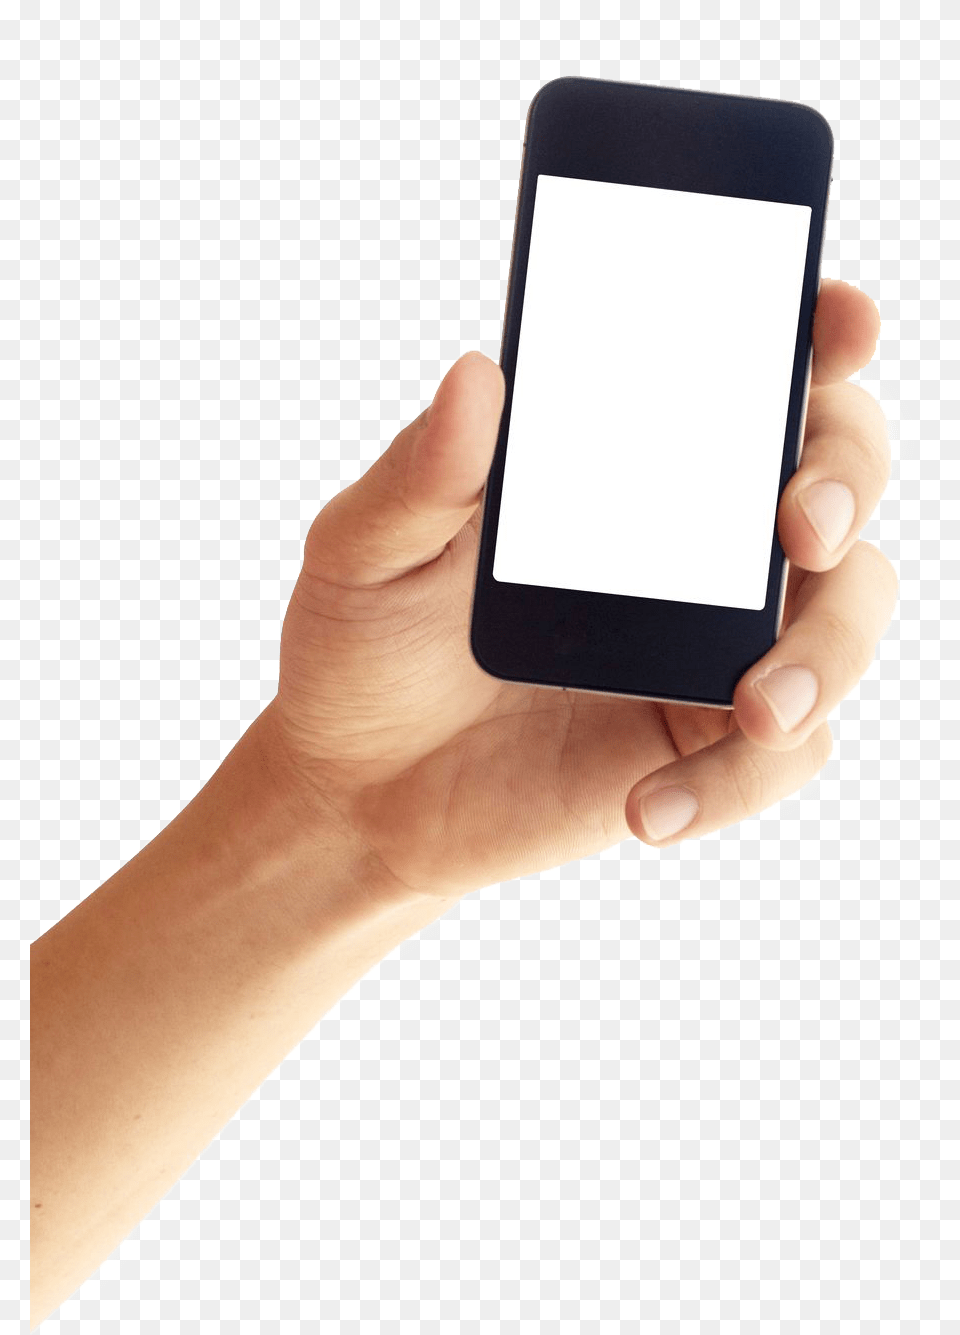 Cellphone In Hand, Electronics, Mobile Phone, Phone, Computer Free Transparent Png